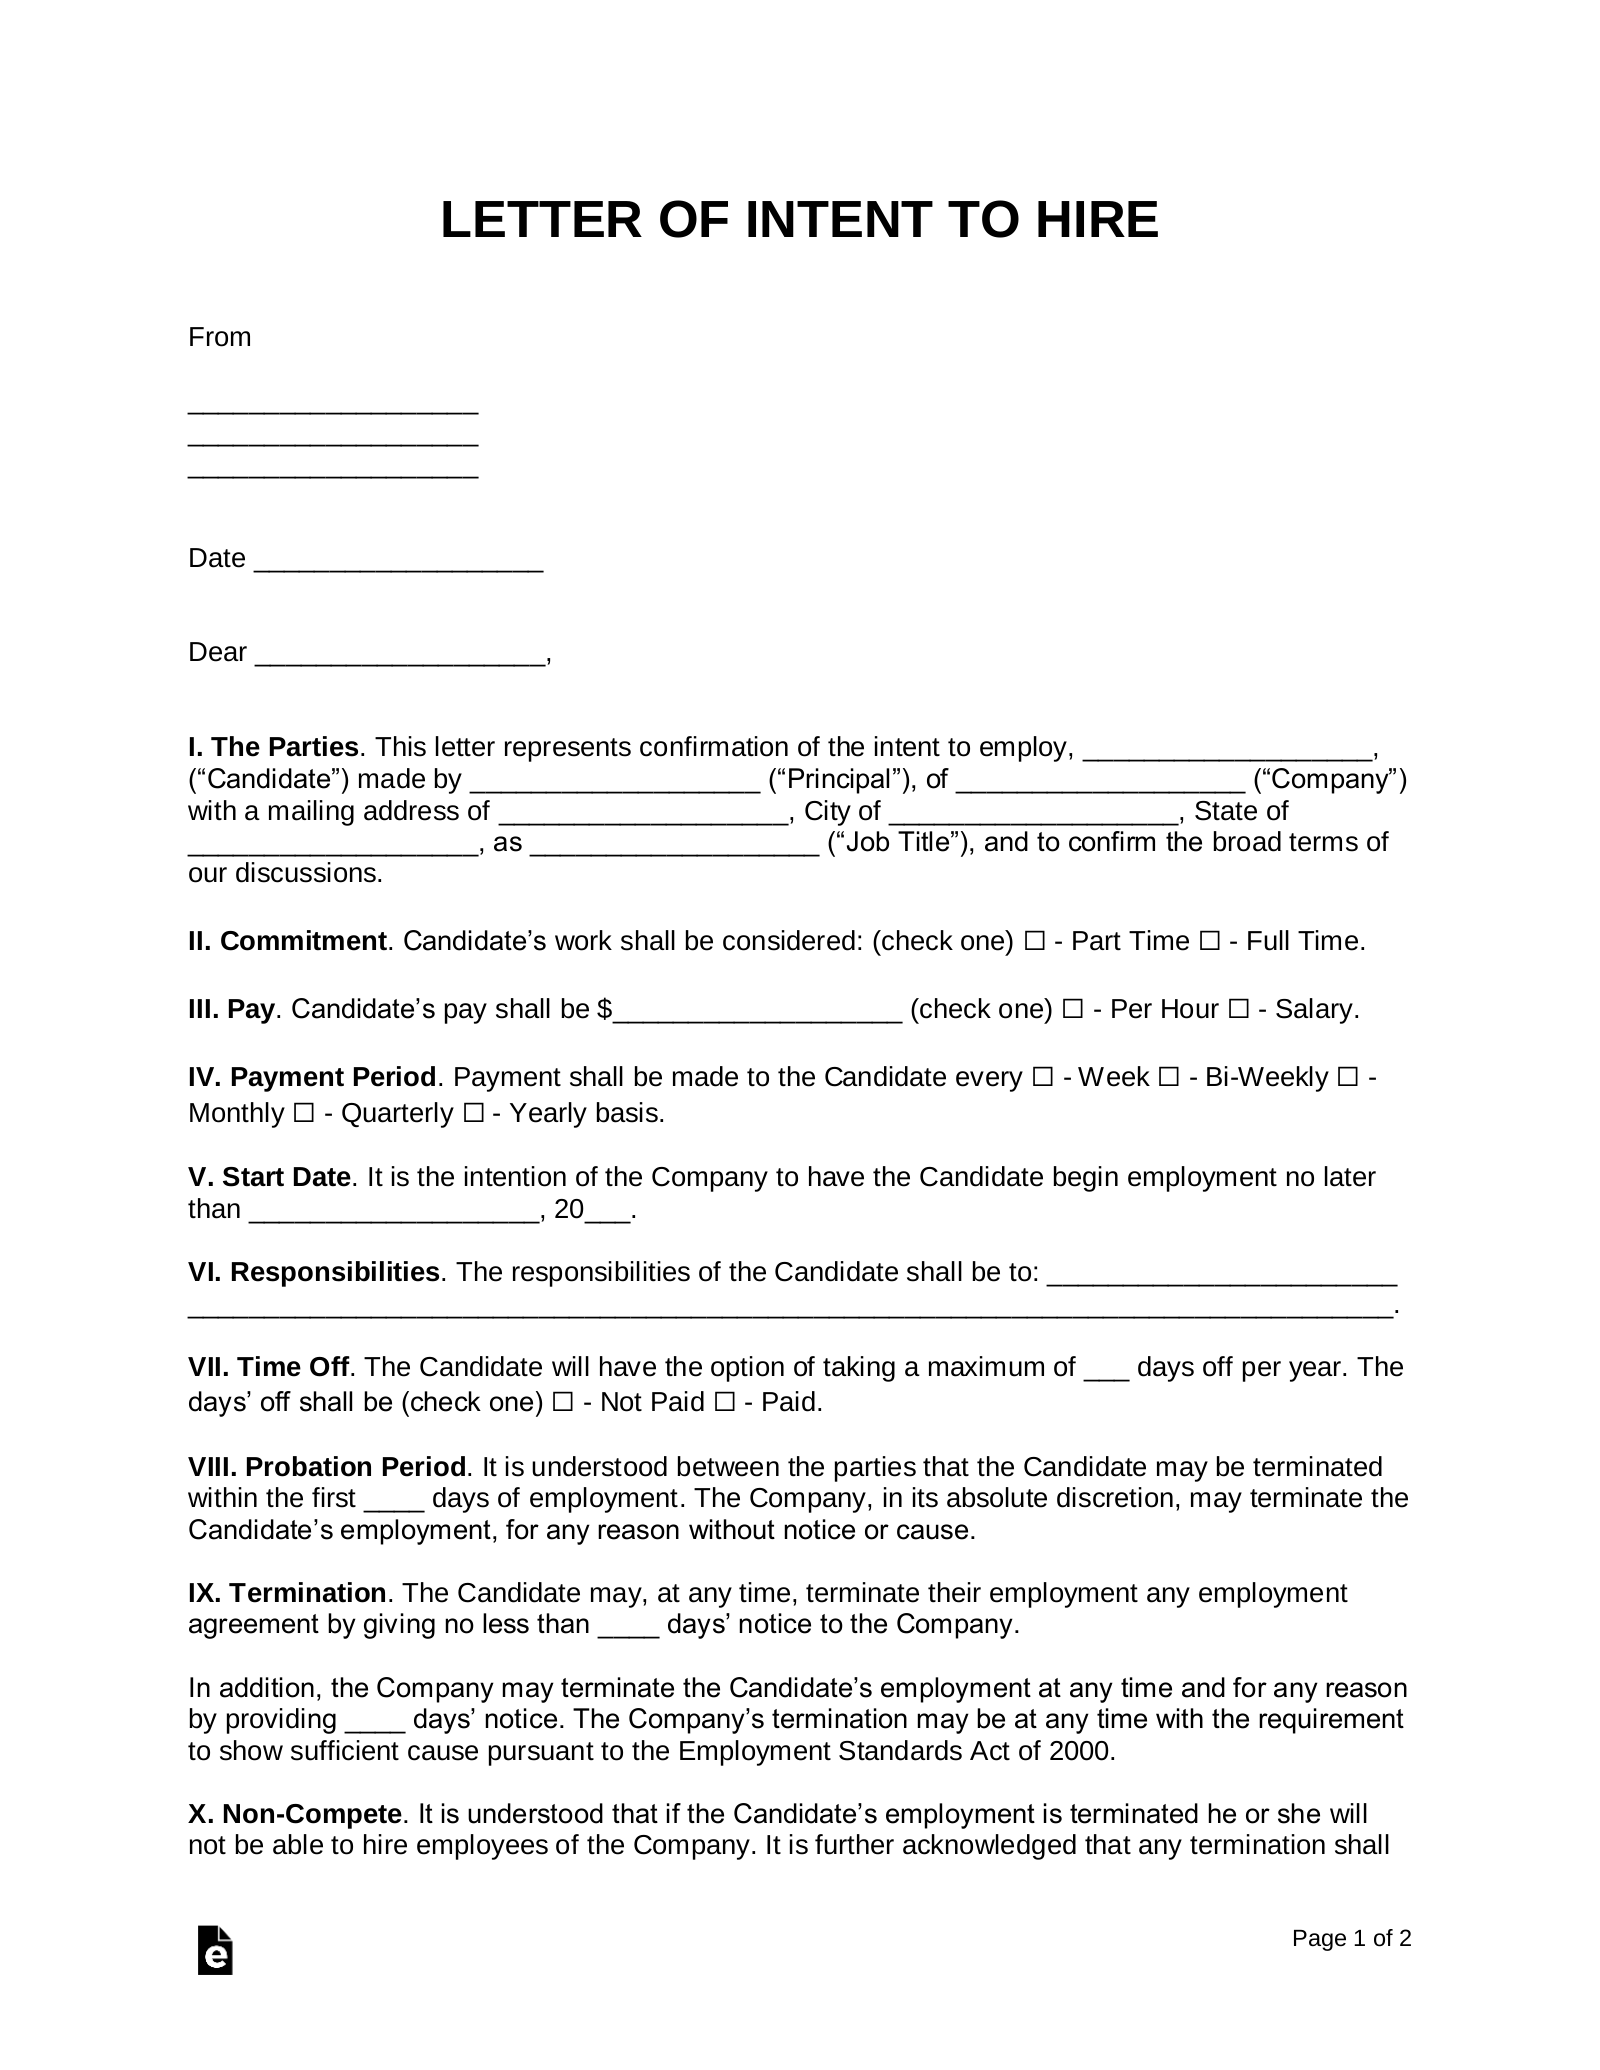 What Is A Letter Of Intent? from eforms.com